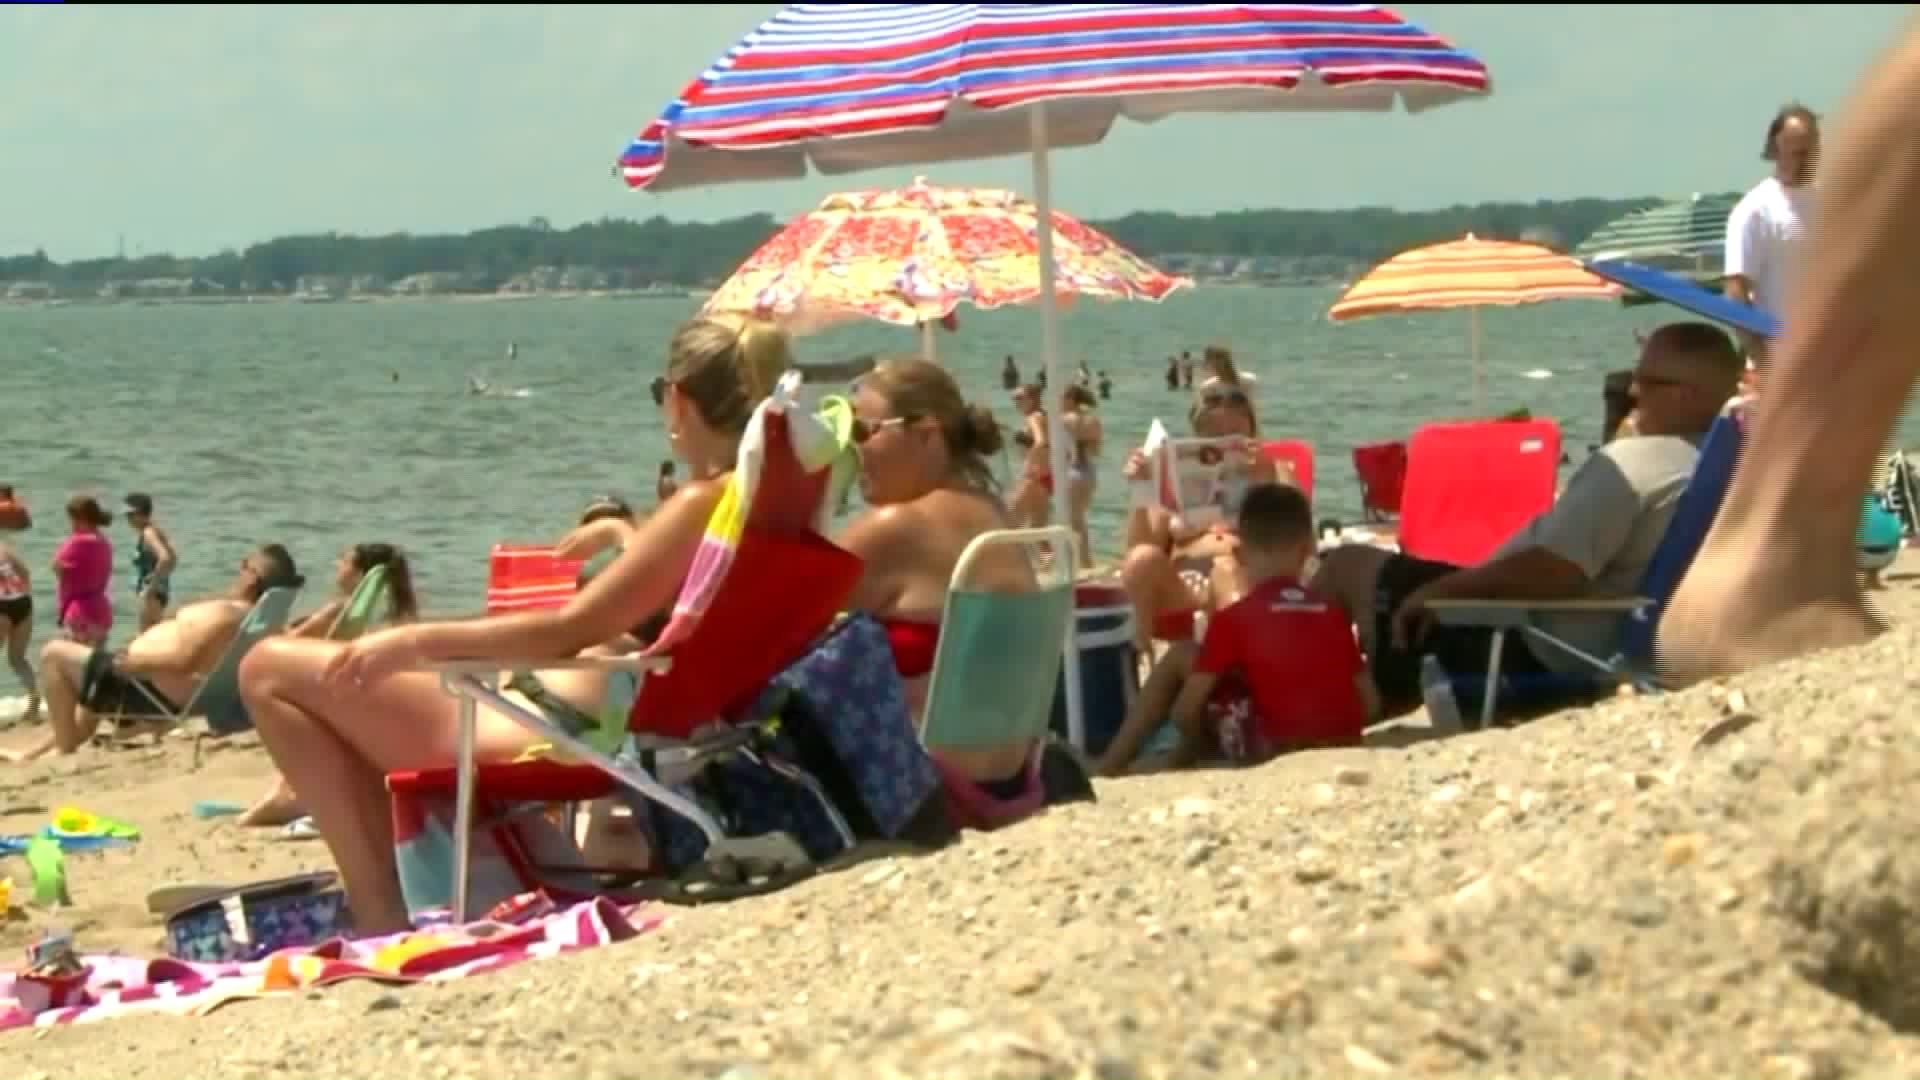 Crowds flock to the beach for the holiday